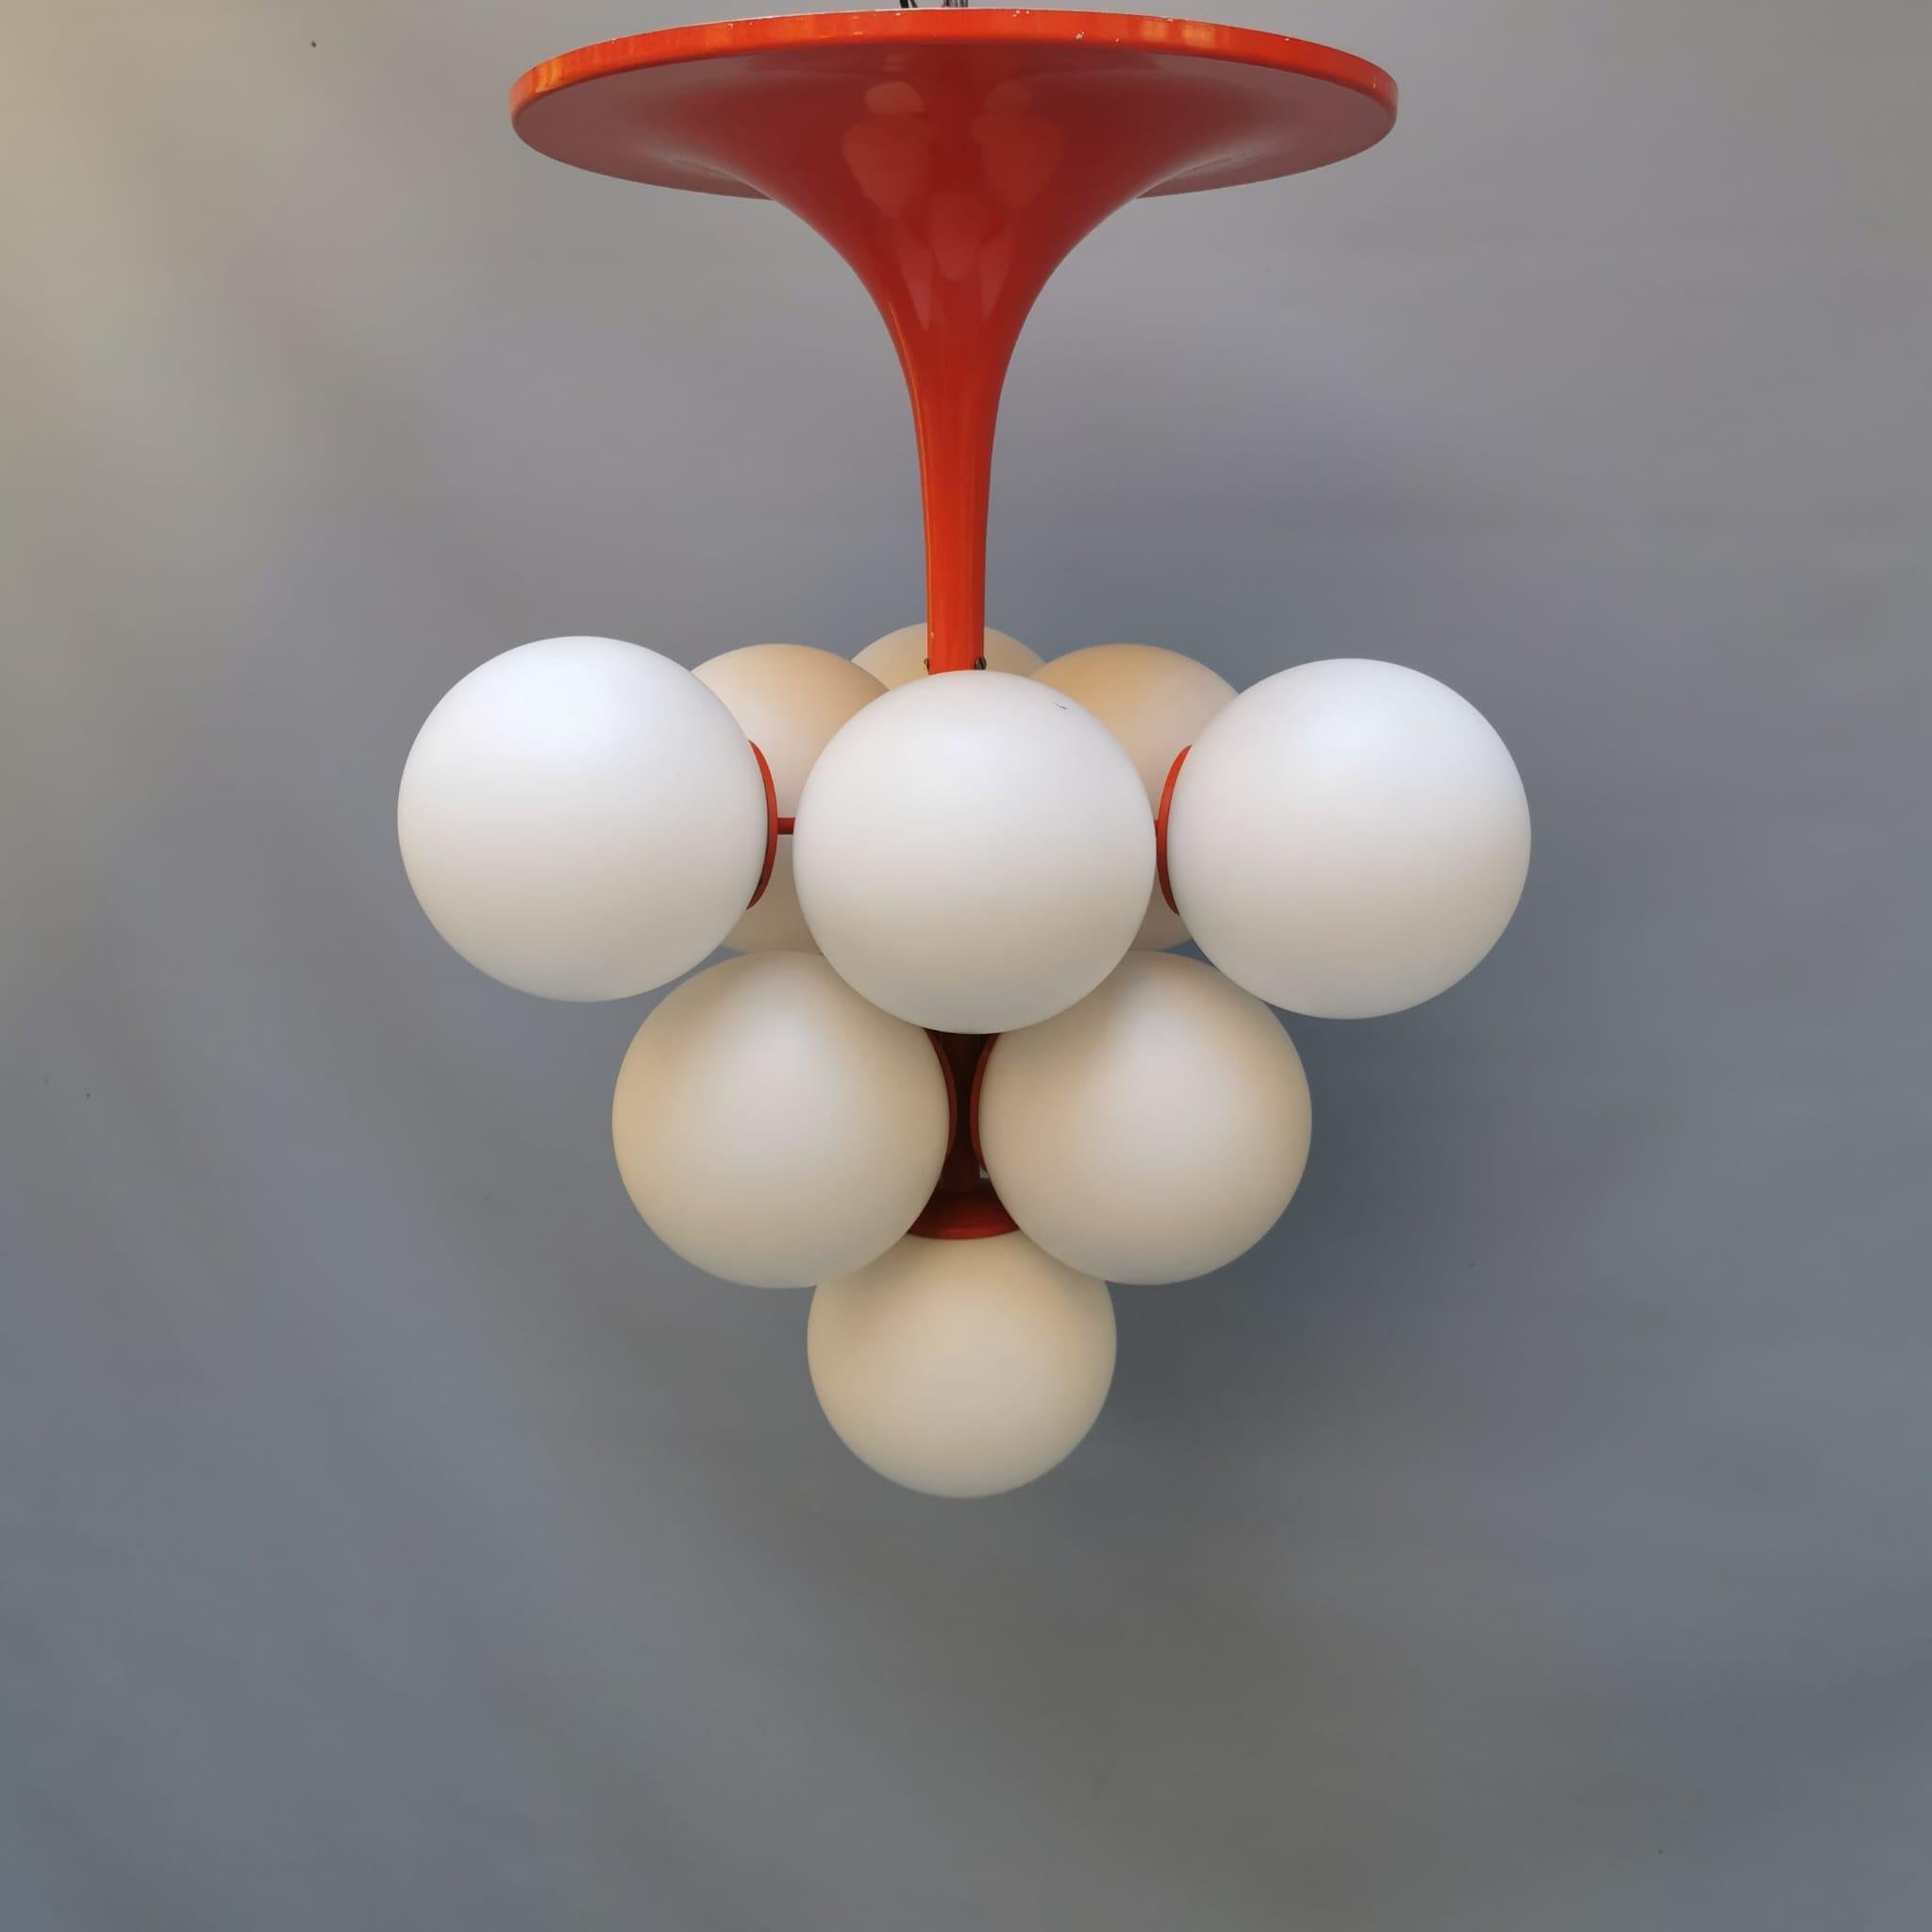 Modern Mid-Century Tulip Chandelier in Glass and Red Metal, by Nele for Temde